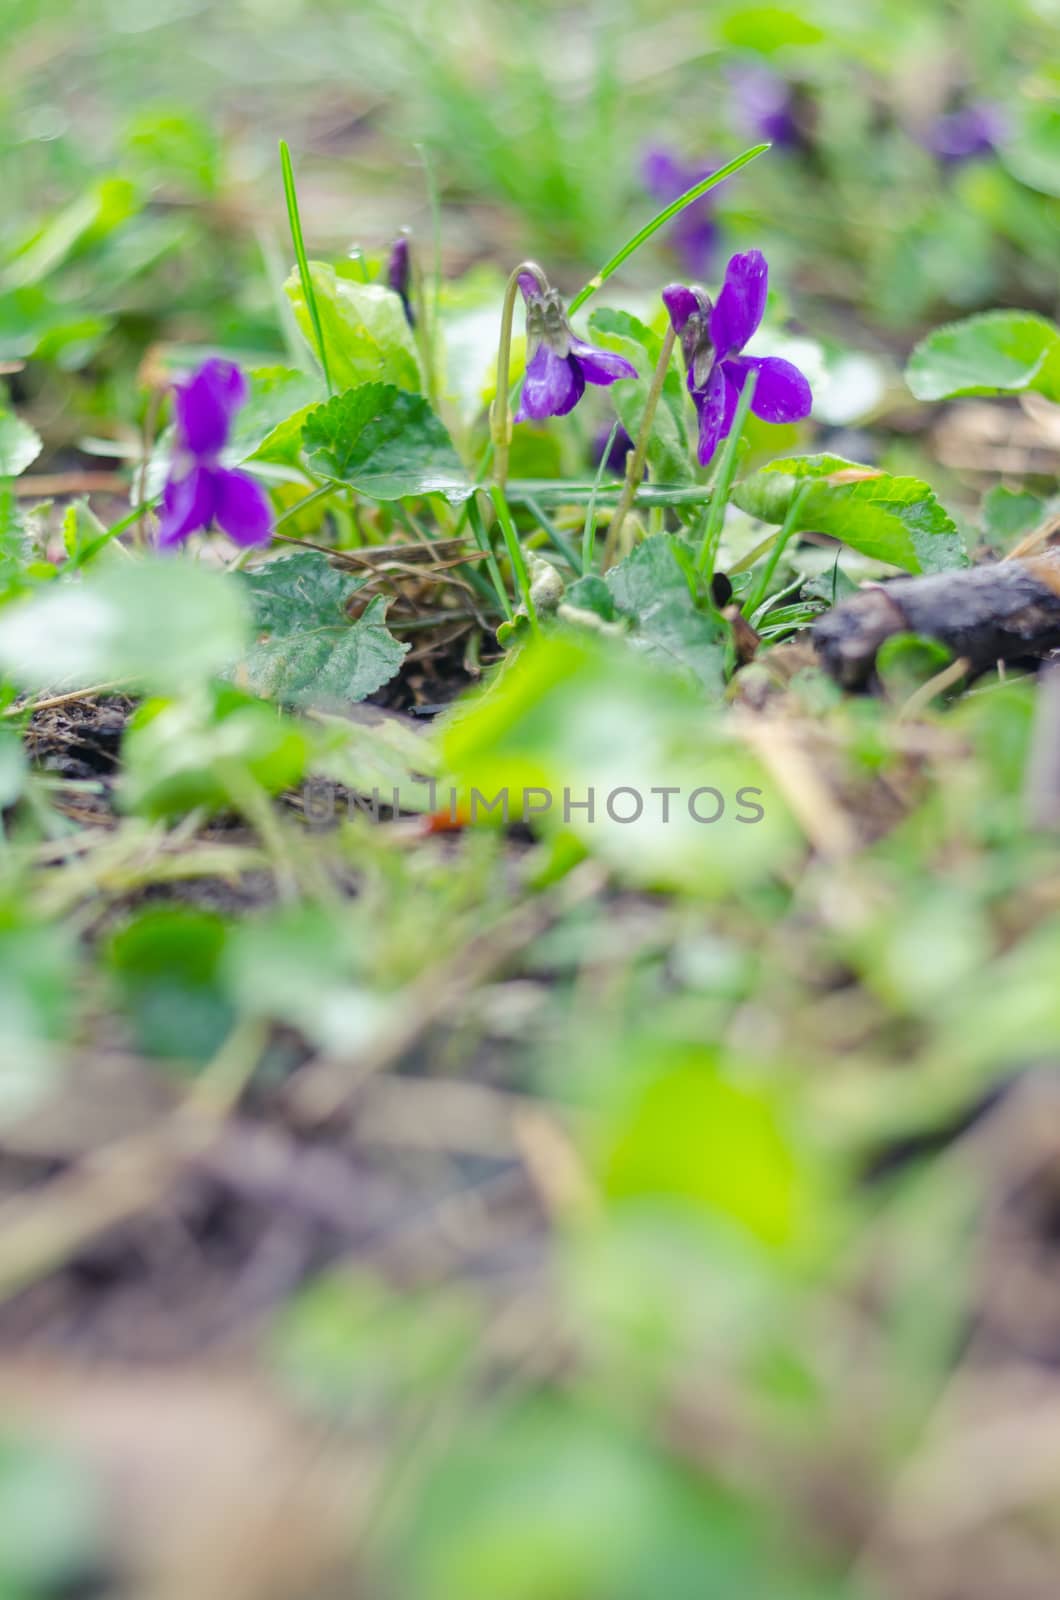 The crocuses family.Spring flowers on ground by goody460